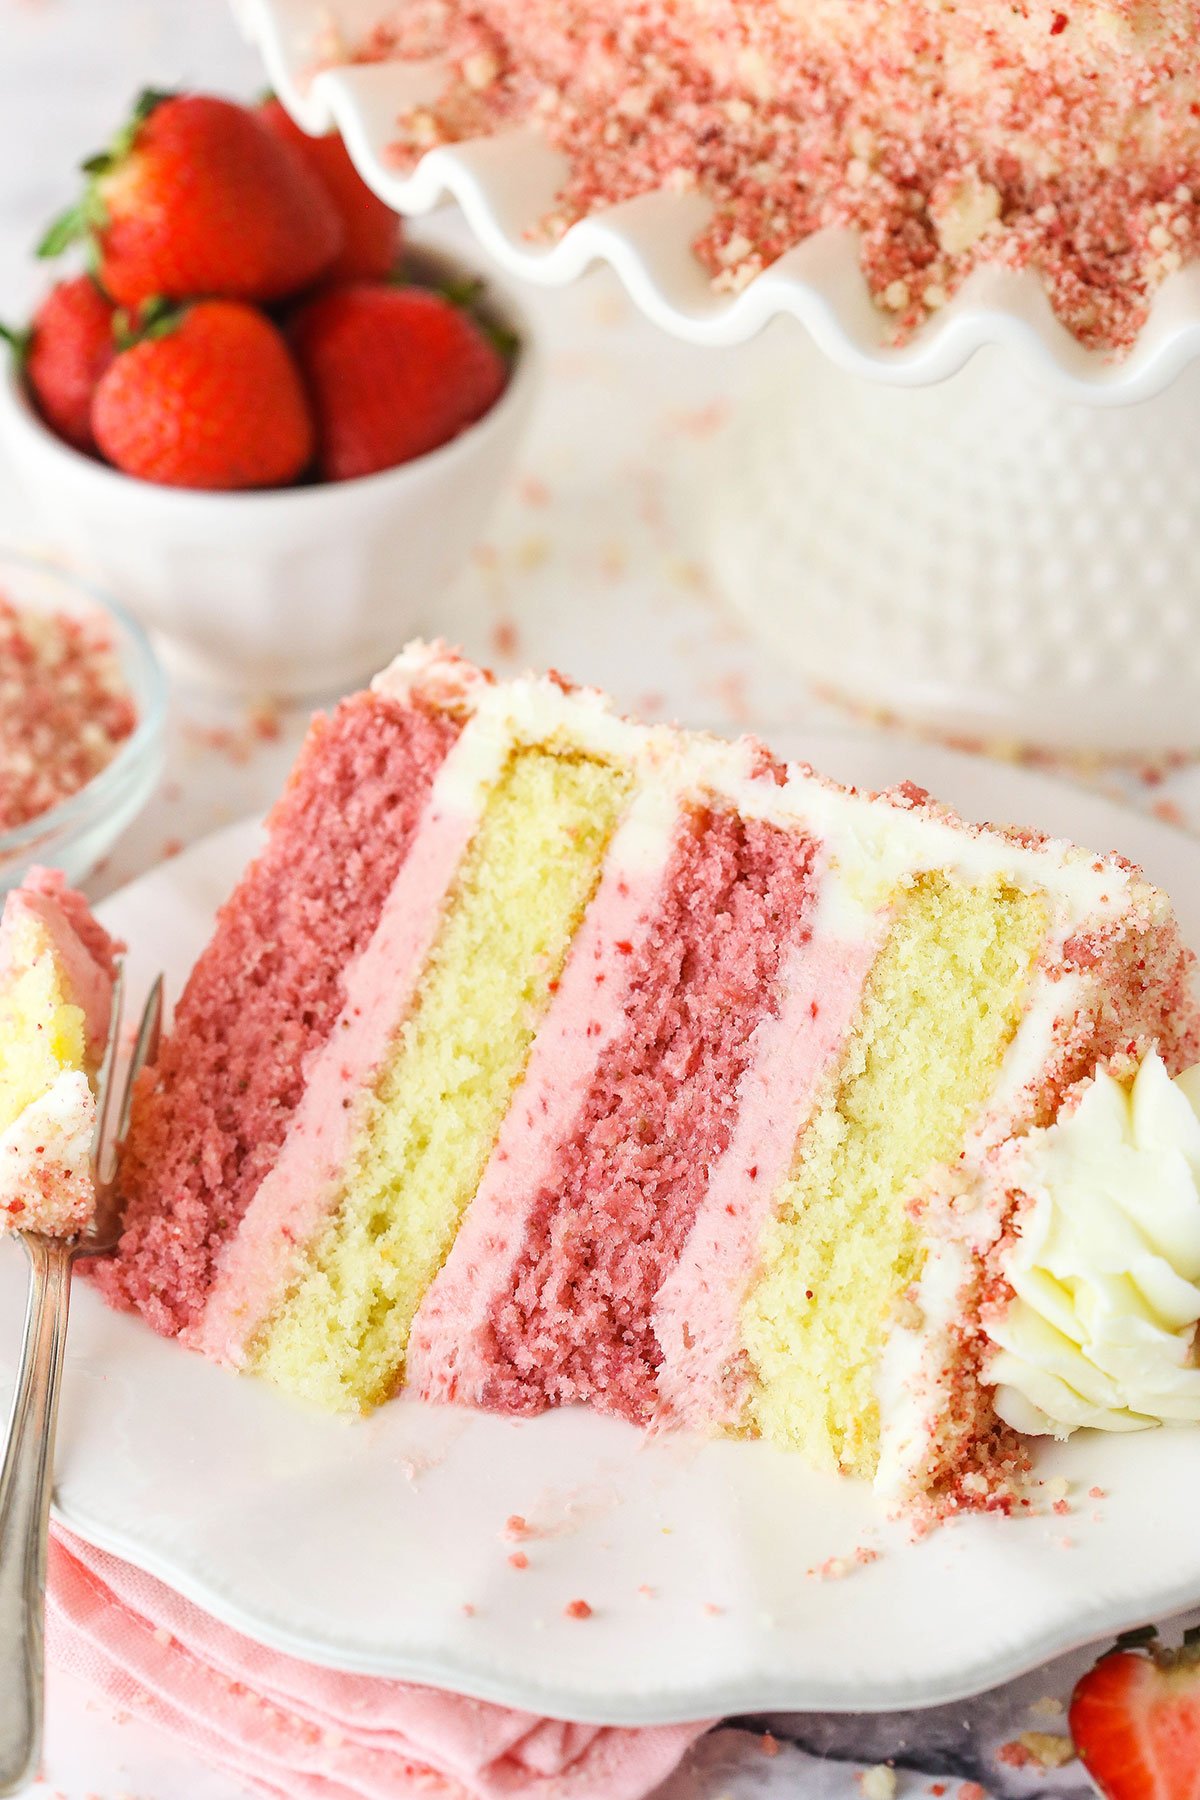 A slice of Strawberry Crunchy Layer Cake with a bite taken out on a white plate with a fork and strawberries in the background